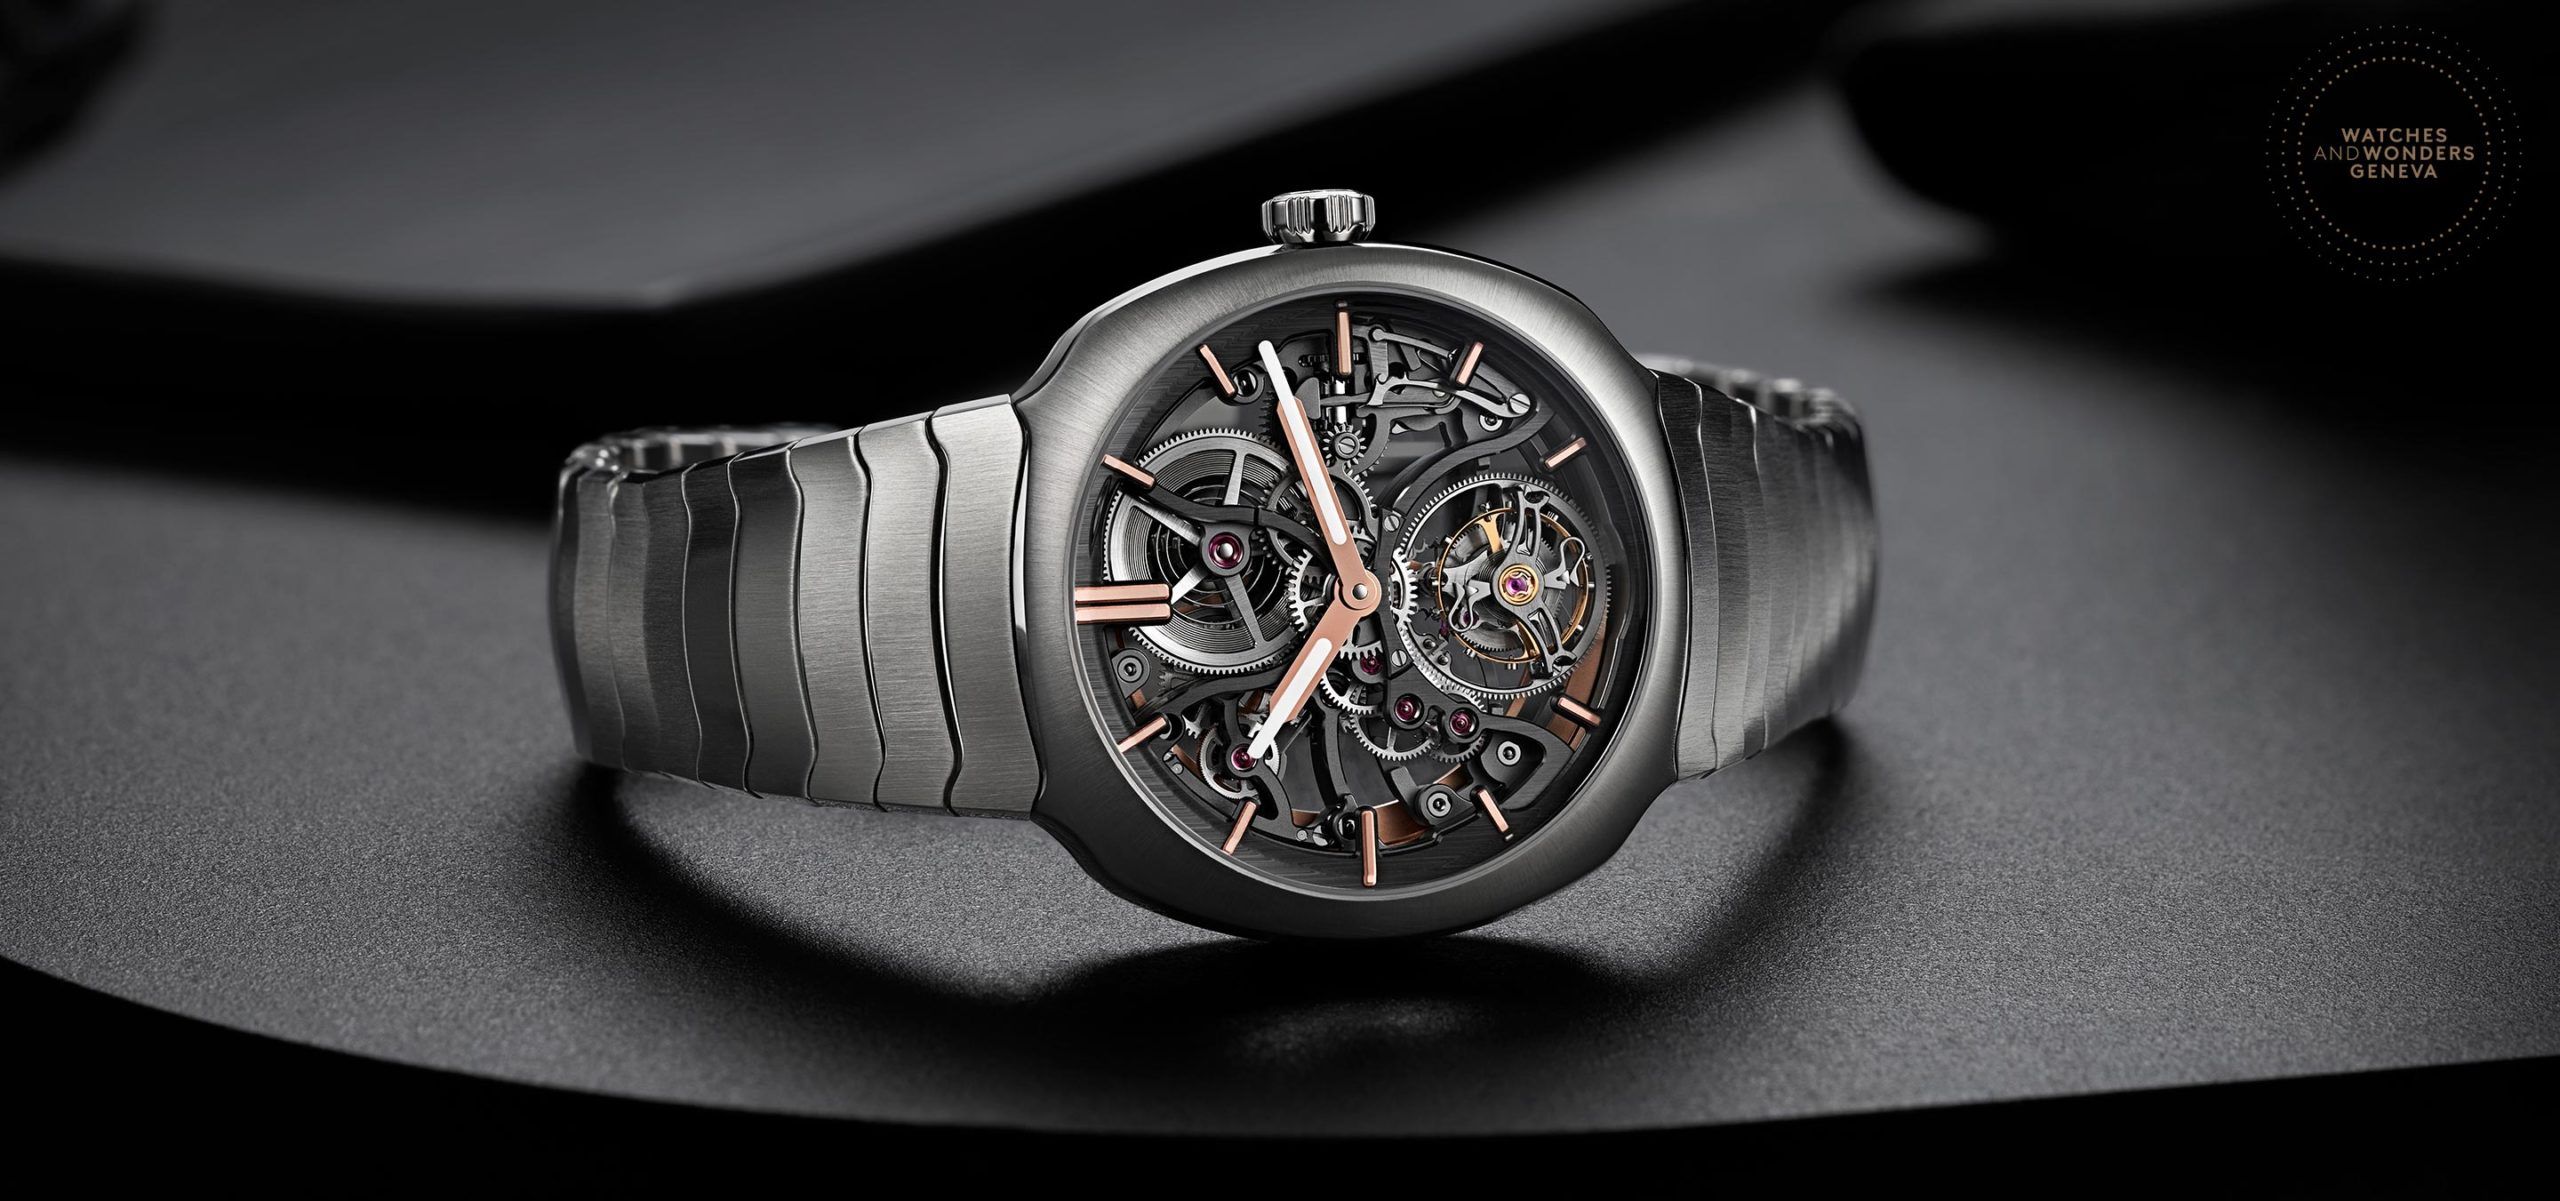 Open-Worked Minimalism: Introducing The H. Moser & Cie. Streamliner Tourbillon Skeleton Timepiece